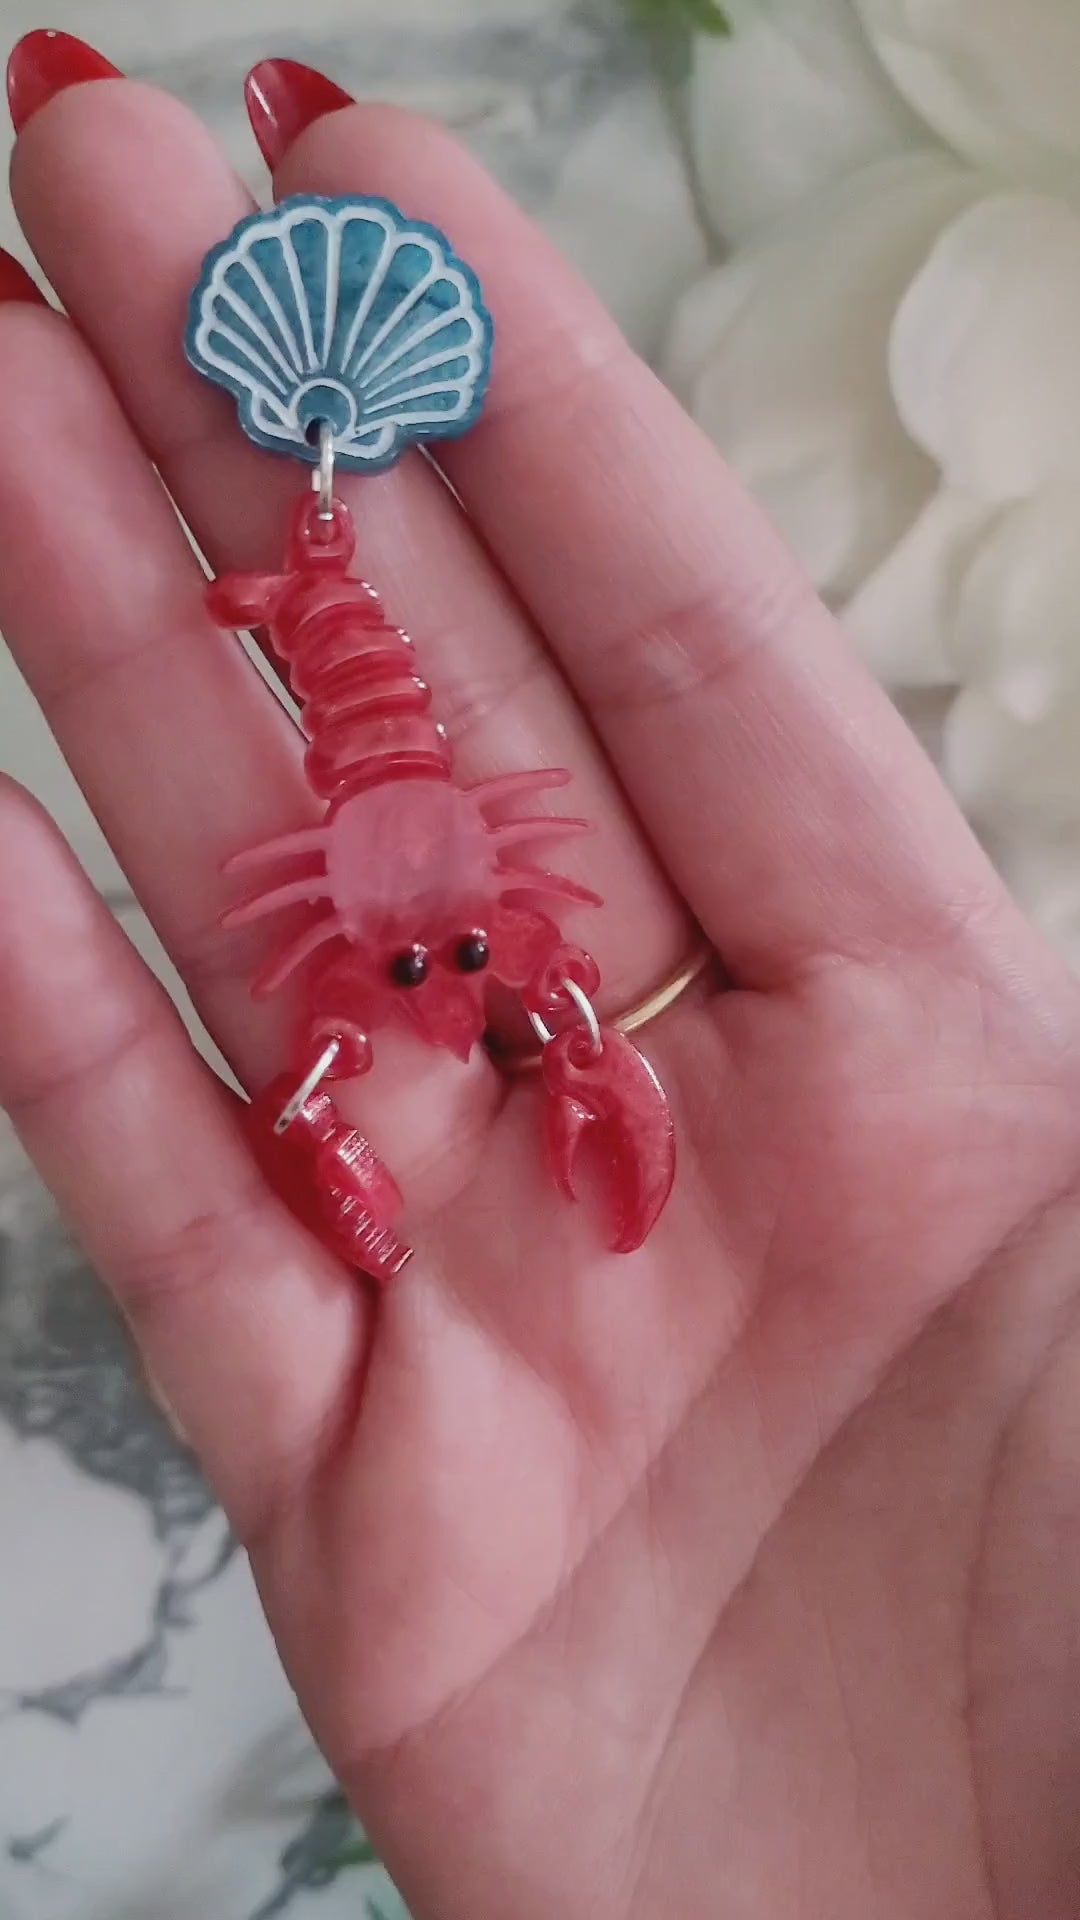 video close up of Red Lobster with a blue shell stud earrings on a marble background with foliage.